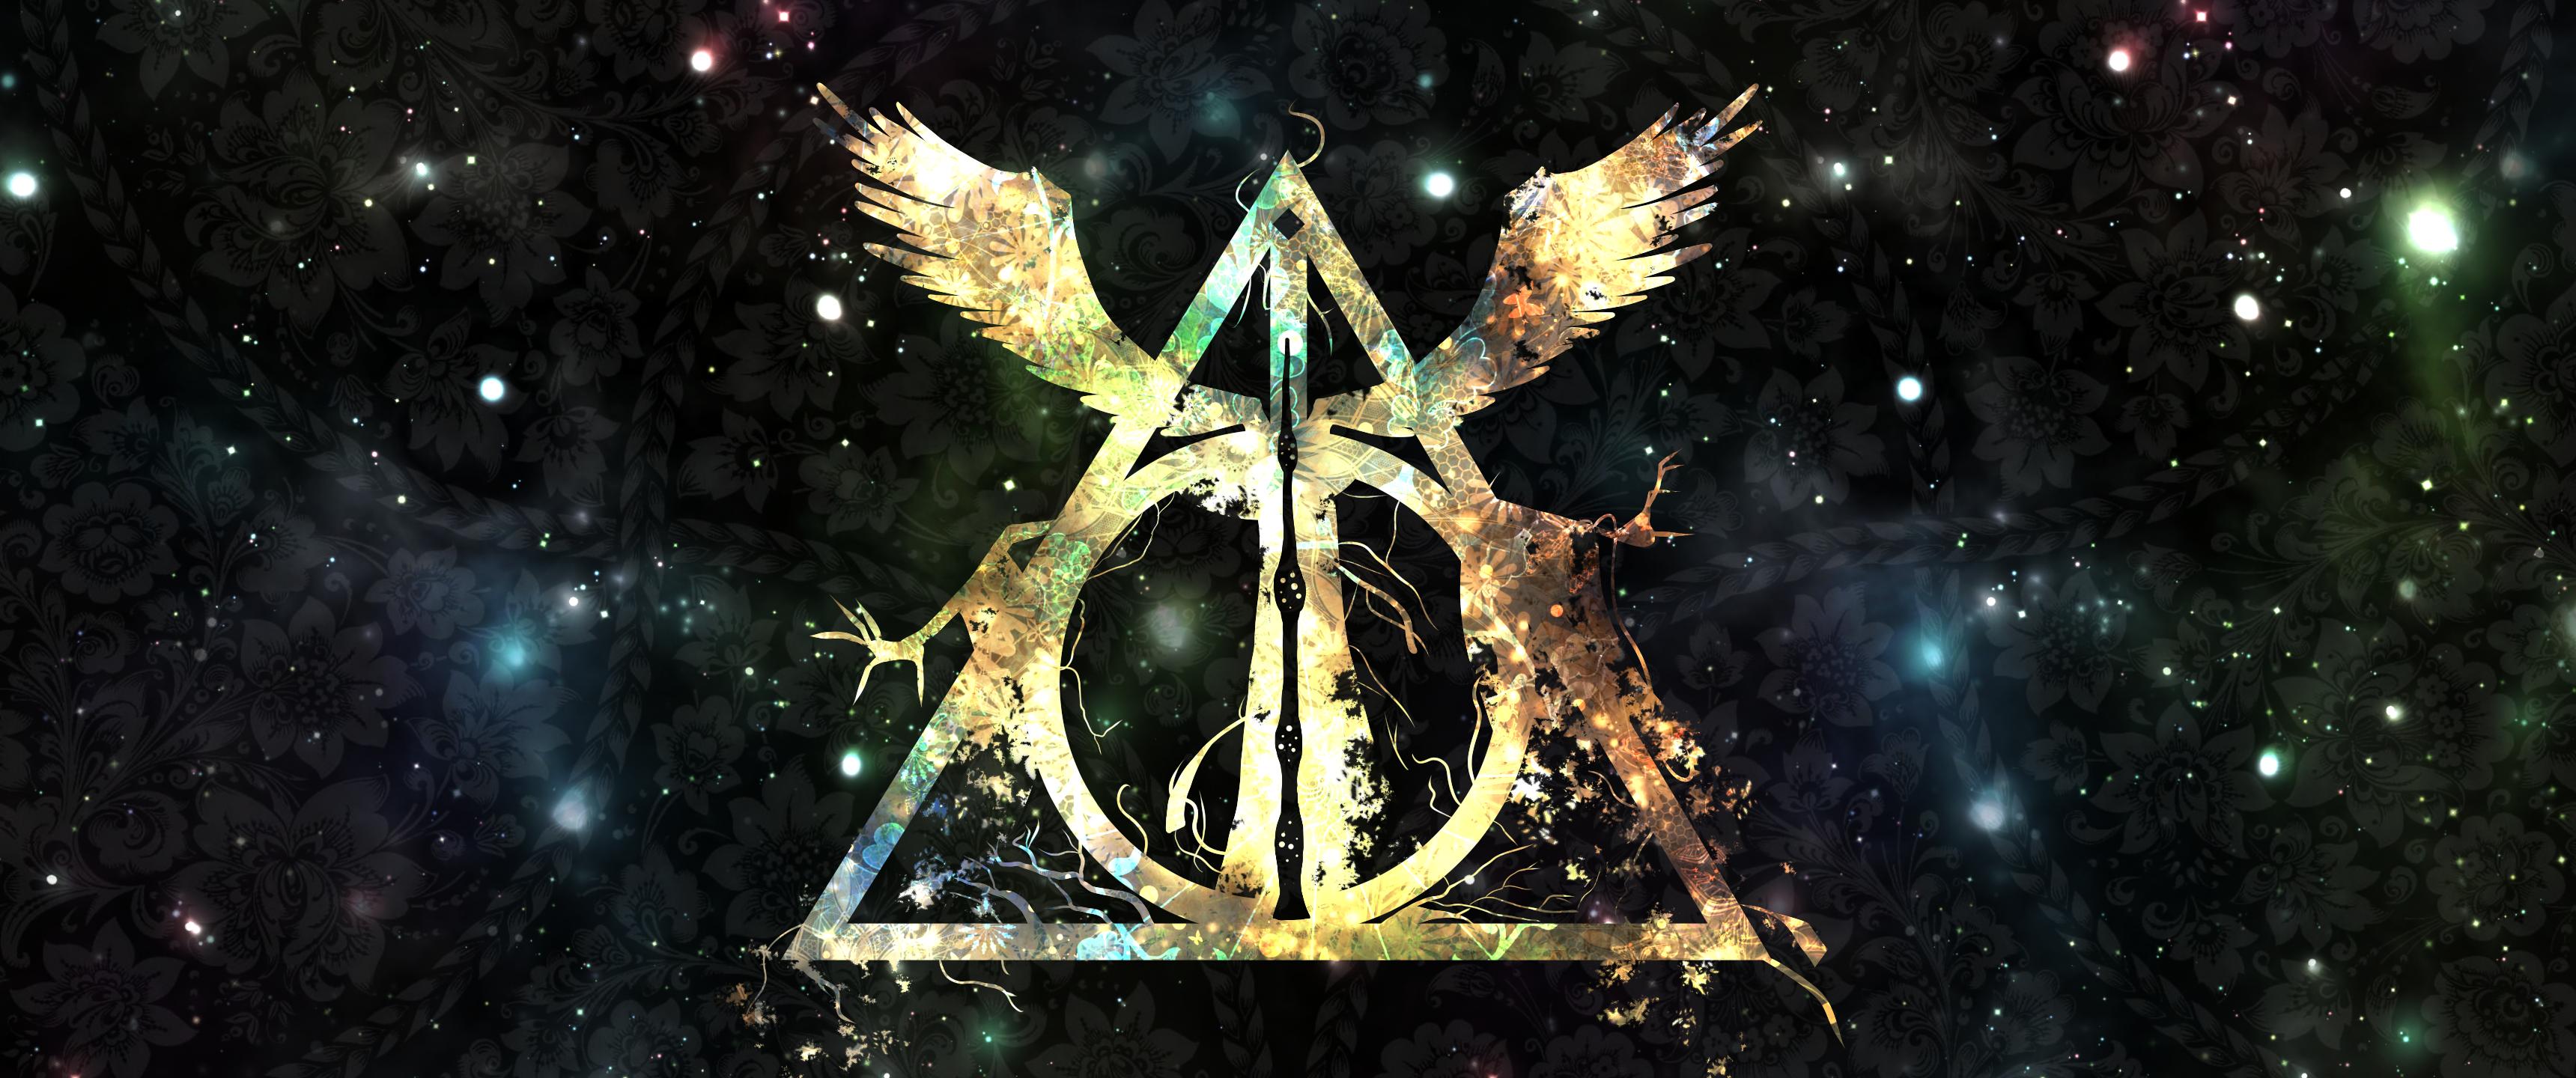 Harry Potter Deathly Hallows Wallpaper Free Harry Potter Deathly Hallows Background